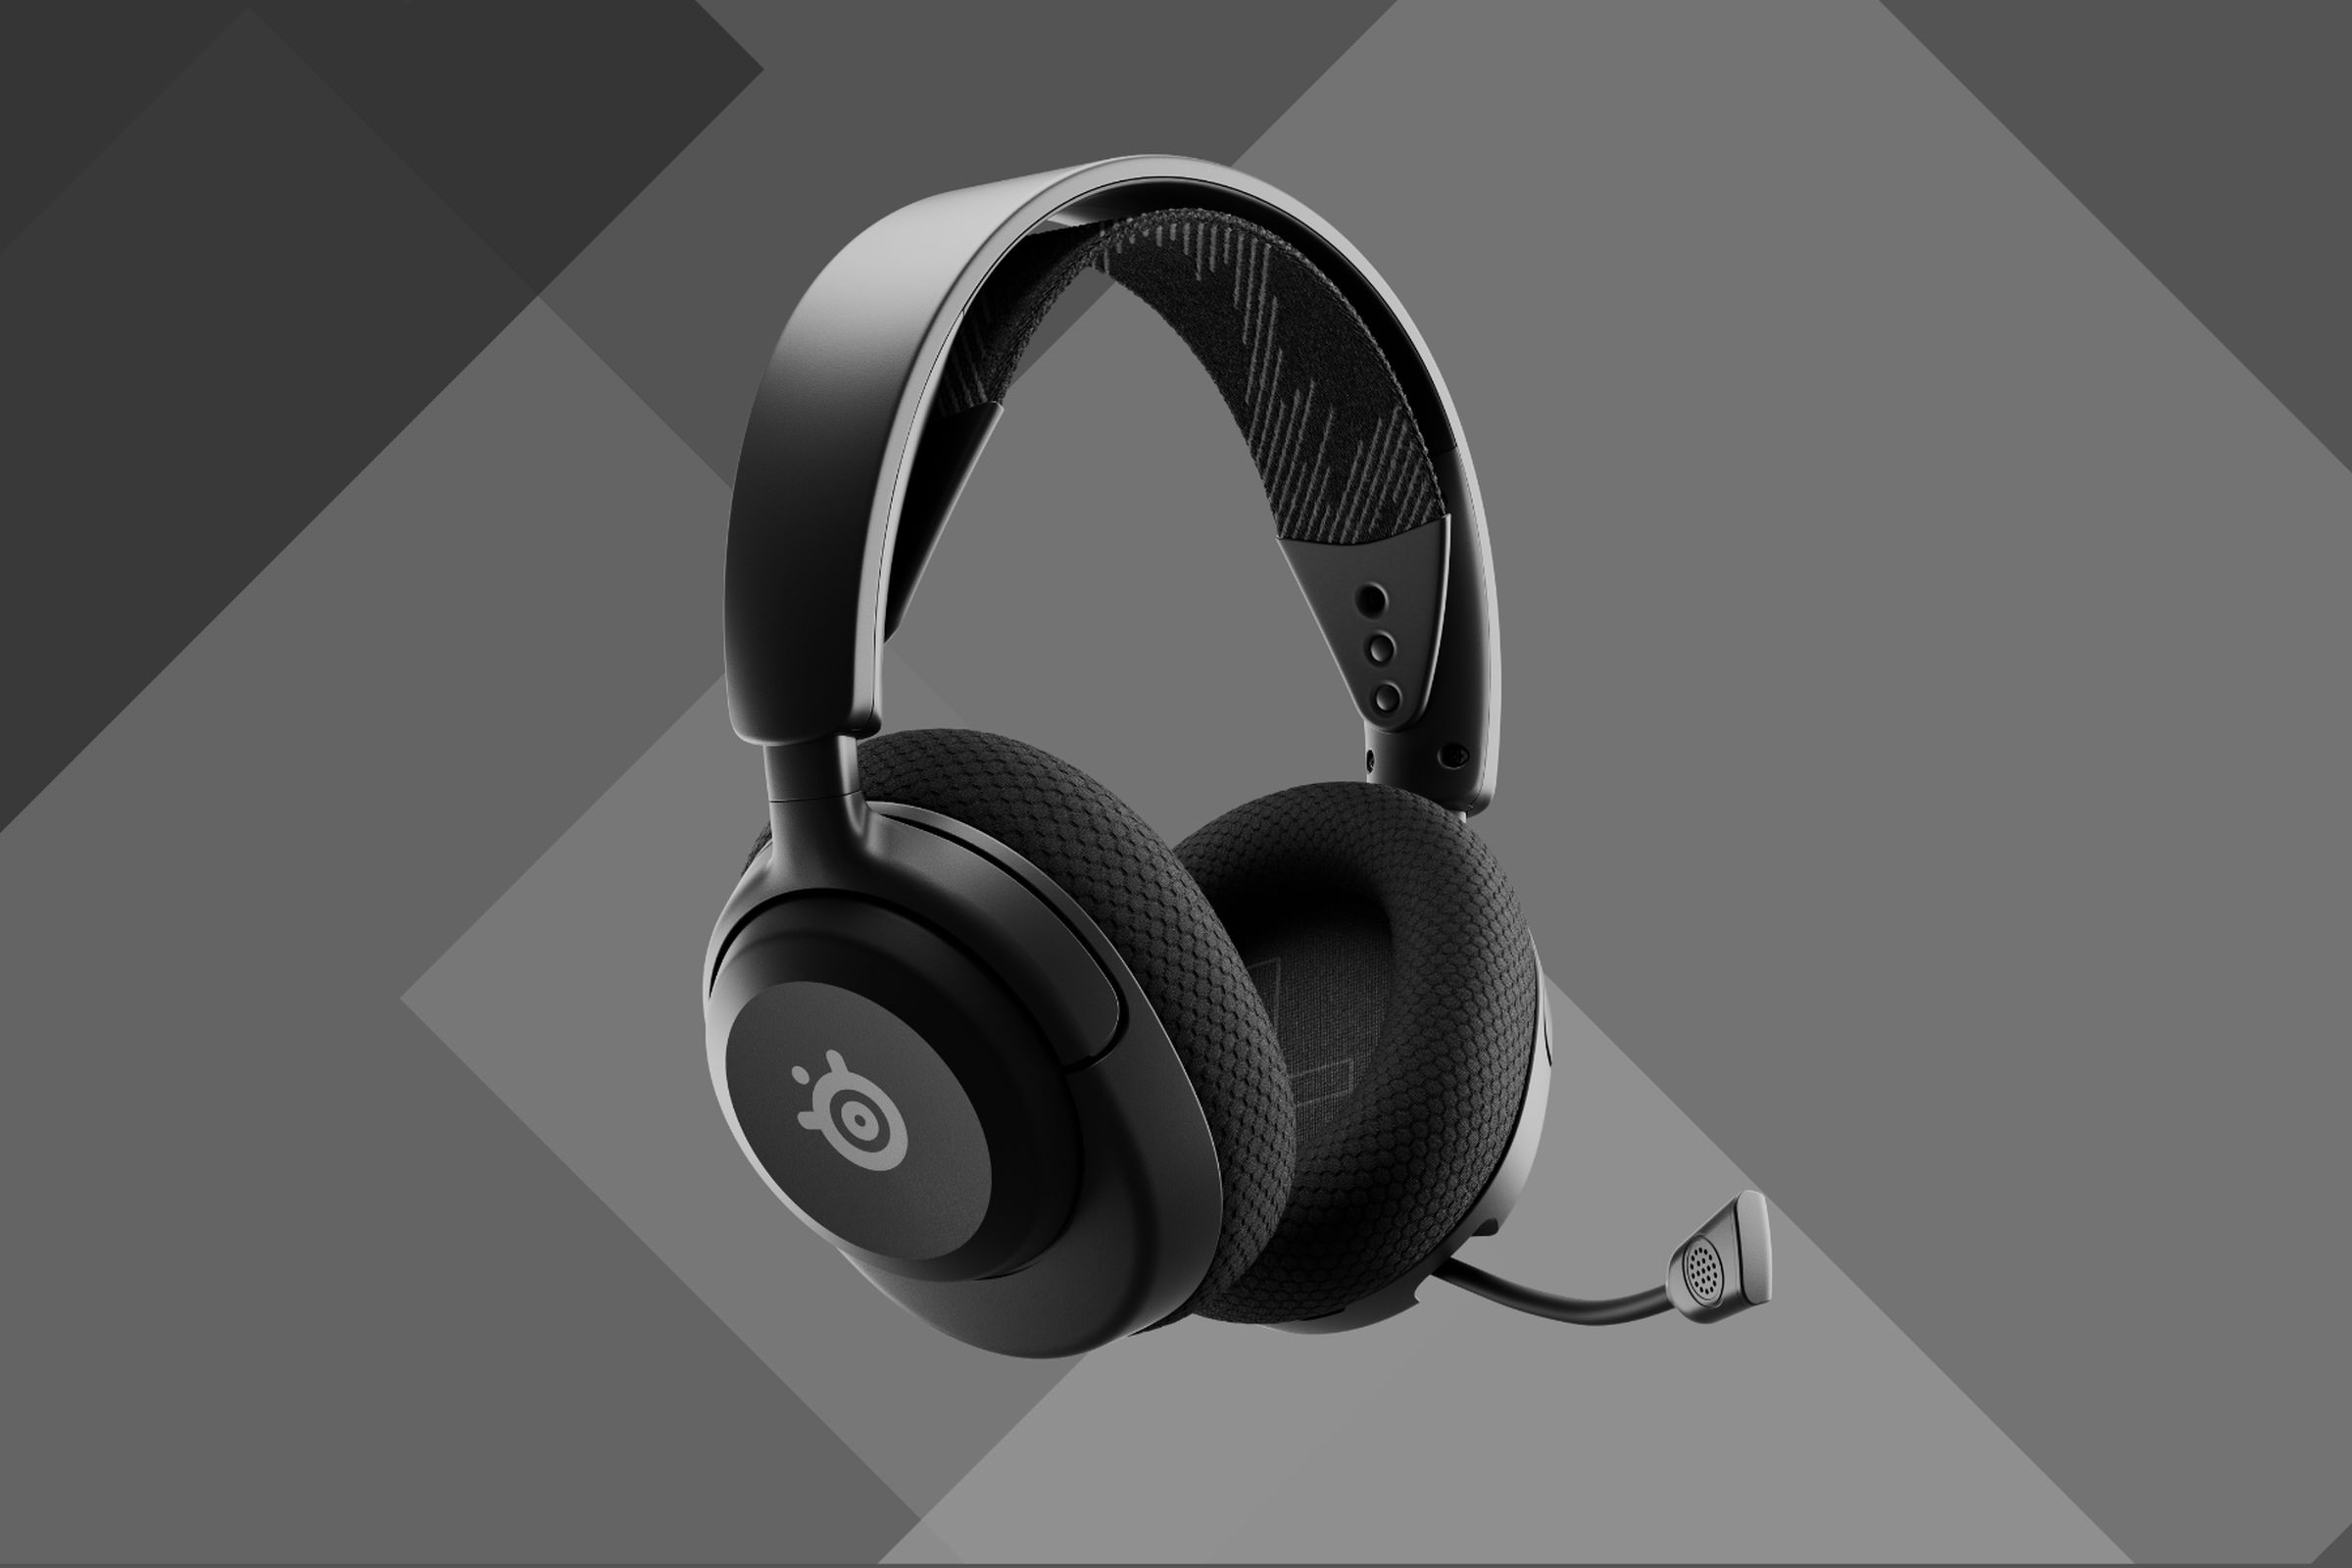 The SteelSeries Arctis Nova 4 wireless gaming headset against a gray backdrop.